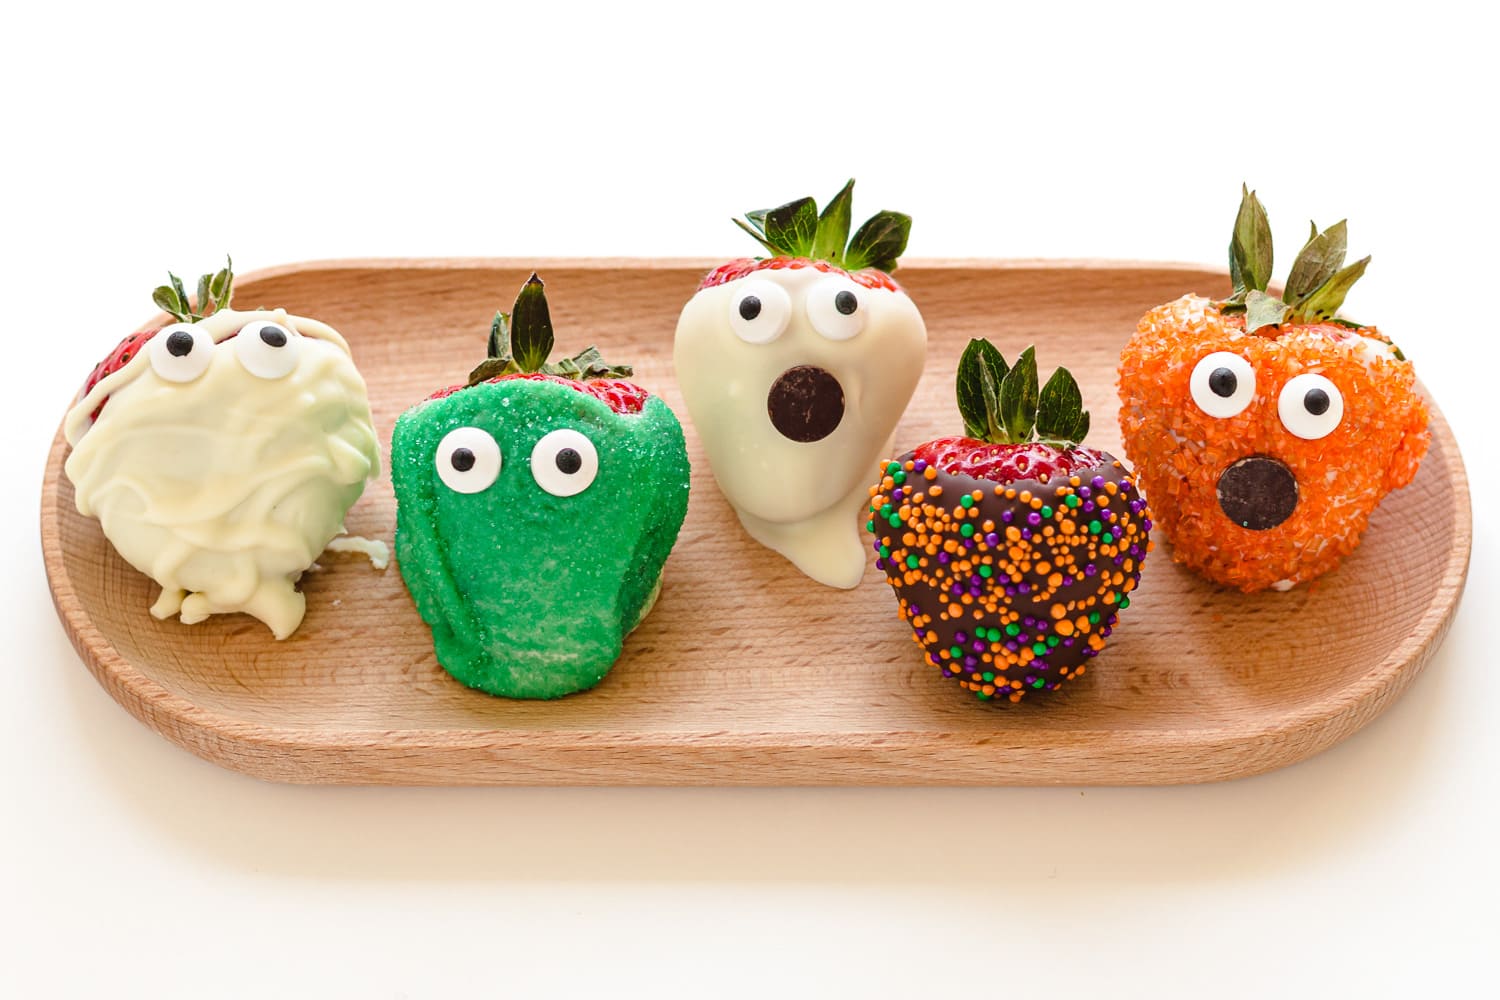 Five different decorated Halloween strawberries lined up on a wooden tray.